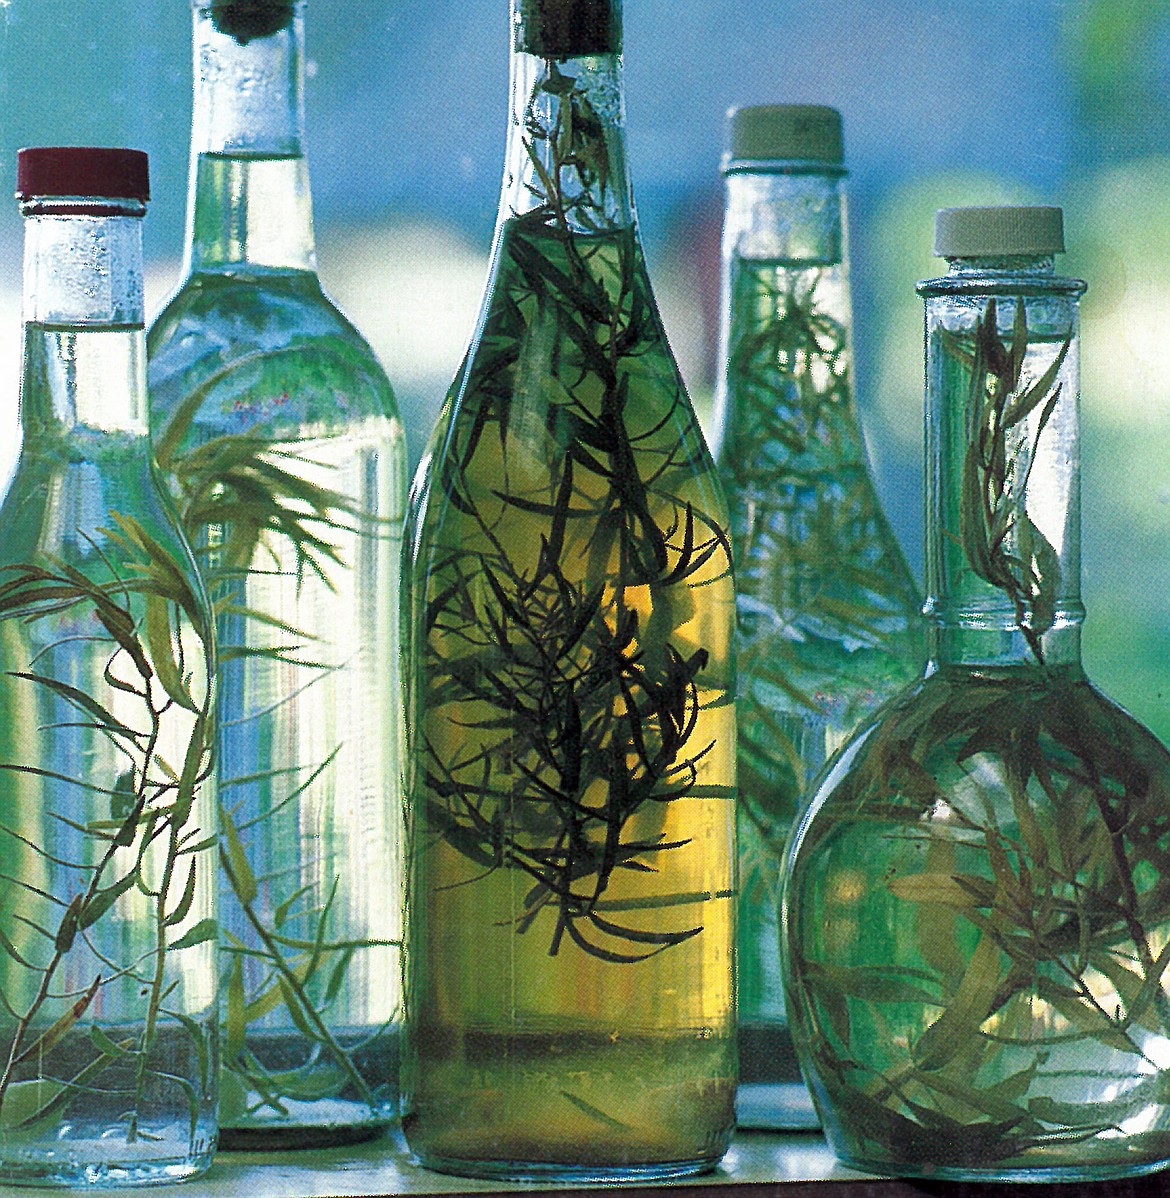 Making your own herbal vinegar can be as simple as tucking a fresh sprig of your chosen herb into a bottle of vinegar. Shown here are white wine, Champagne, rice wine, and malt,  featuring tarragon, one of the most versatile of vinegar herbs.